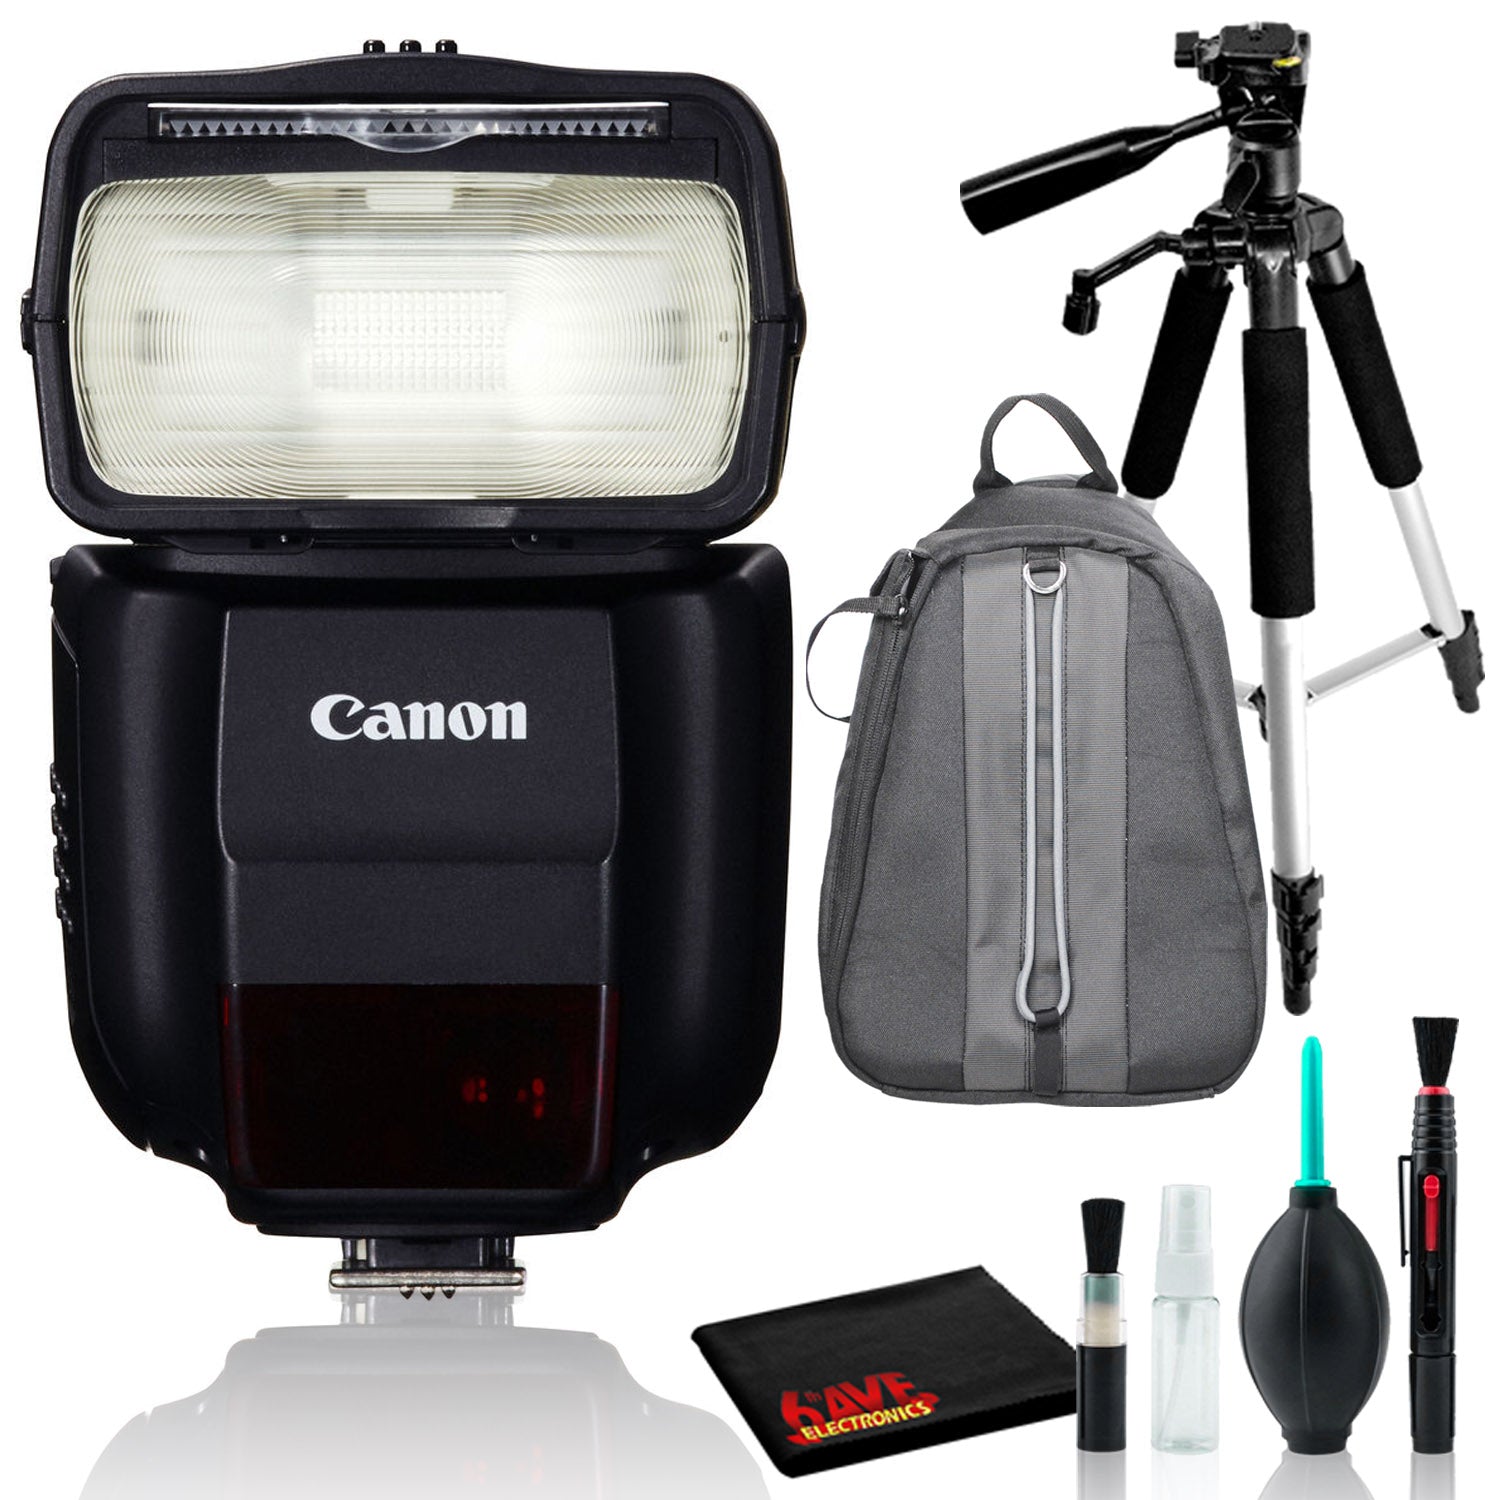 Canon Speedlite 430EX III-RT (Intl Model) with Aluminum Tripod and Backpack